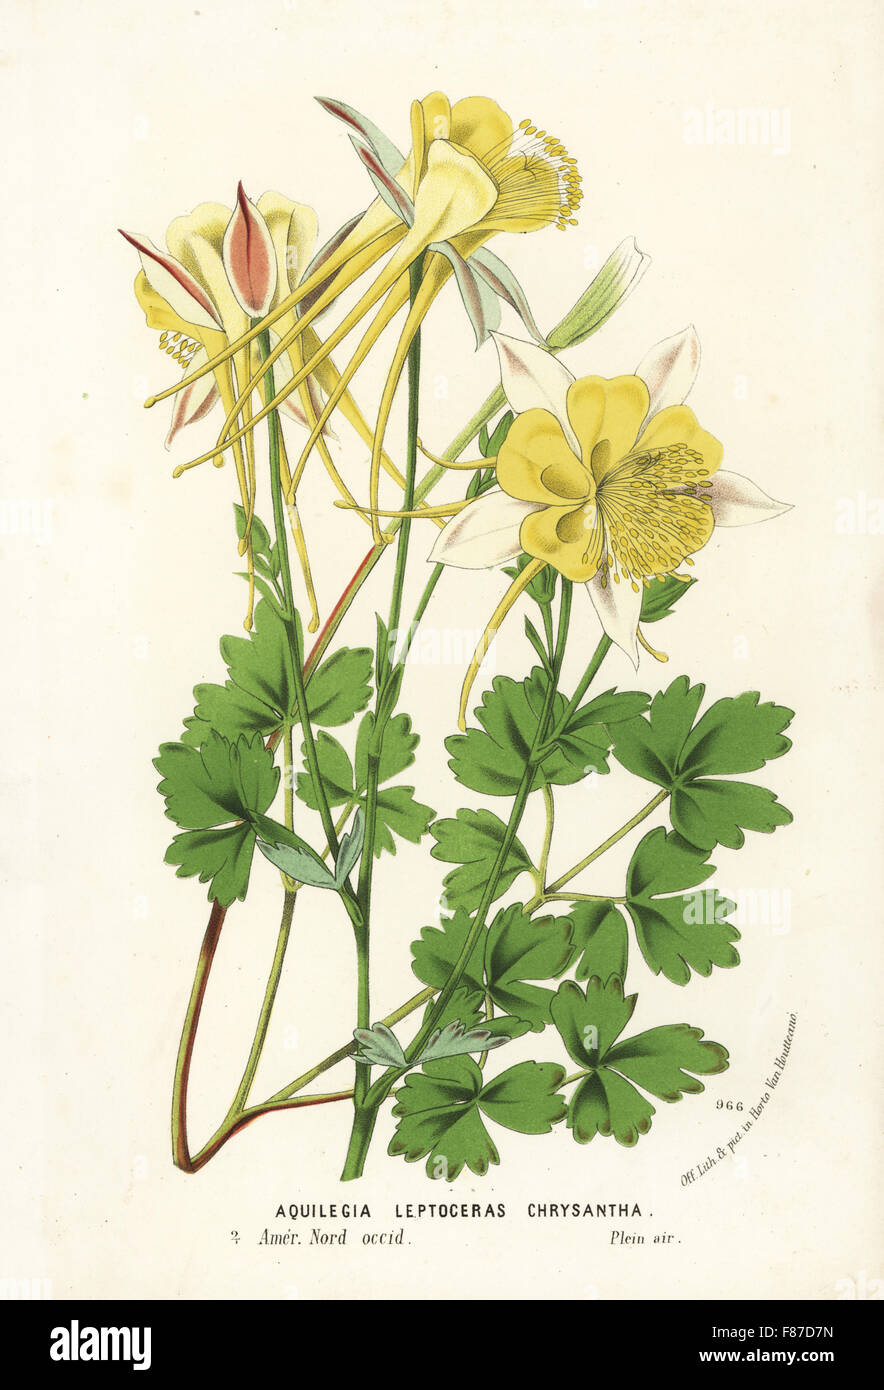 Golden columbine, Aquilegia chrysantha (Aquilegia leptoceras chrysantha). Handcoloured lithograph from Louis van Houtte and Charles Lemaire's Flowers of the Gardens and Hothouses of Europe, Flore des Serres et des Jardins de l'Europe, Ghent, Belgium, 1874. Stock Photo